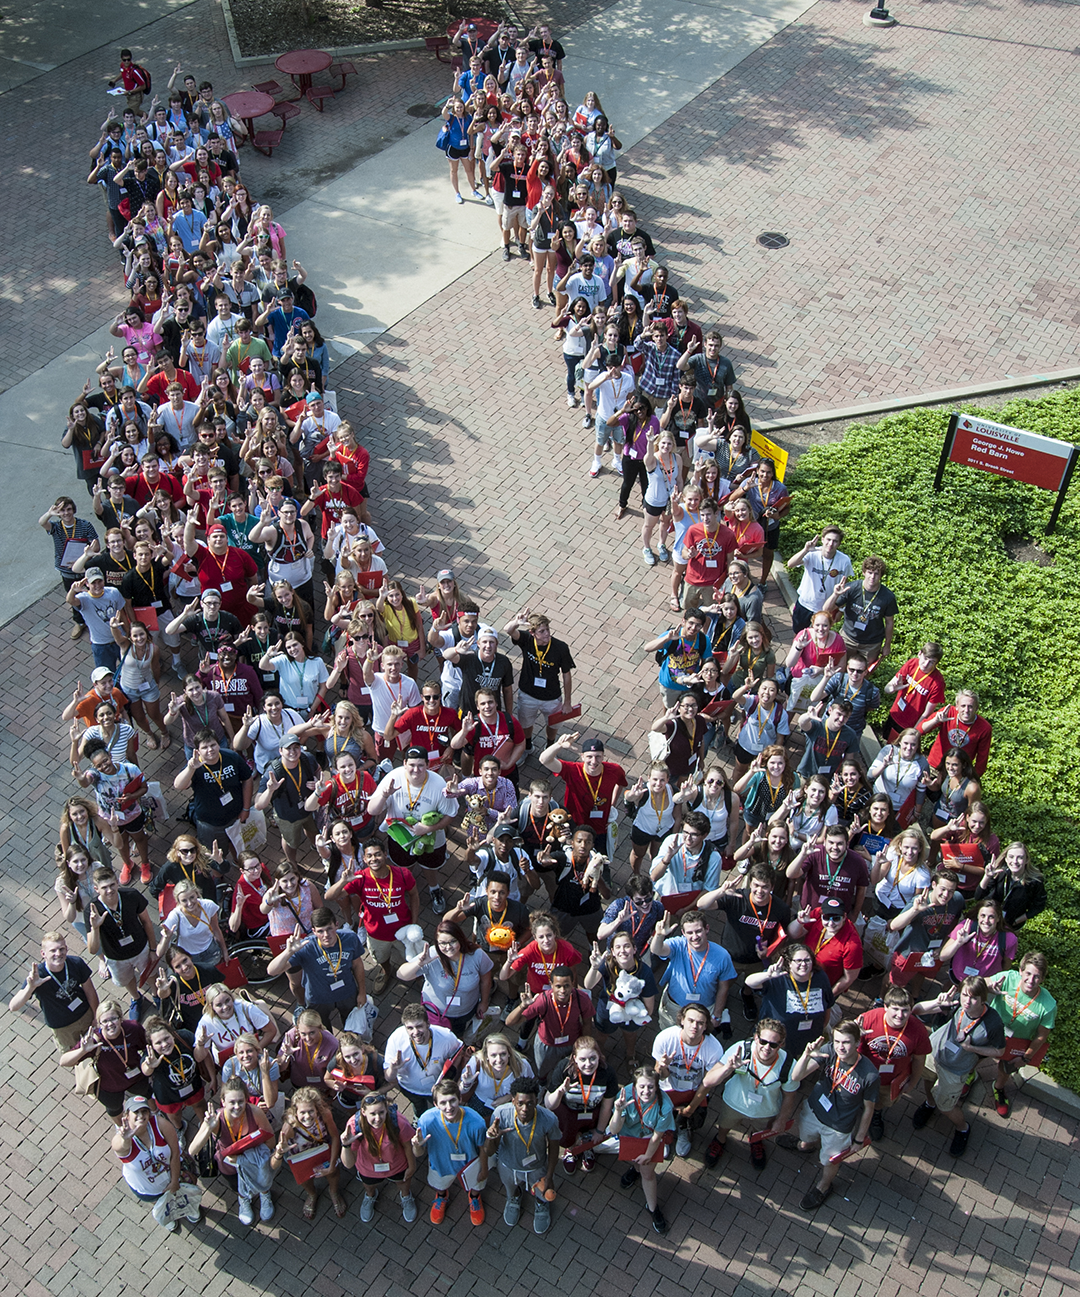 UofL Students arranged in a large U shape, each raising the L